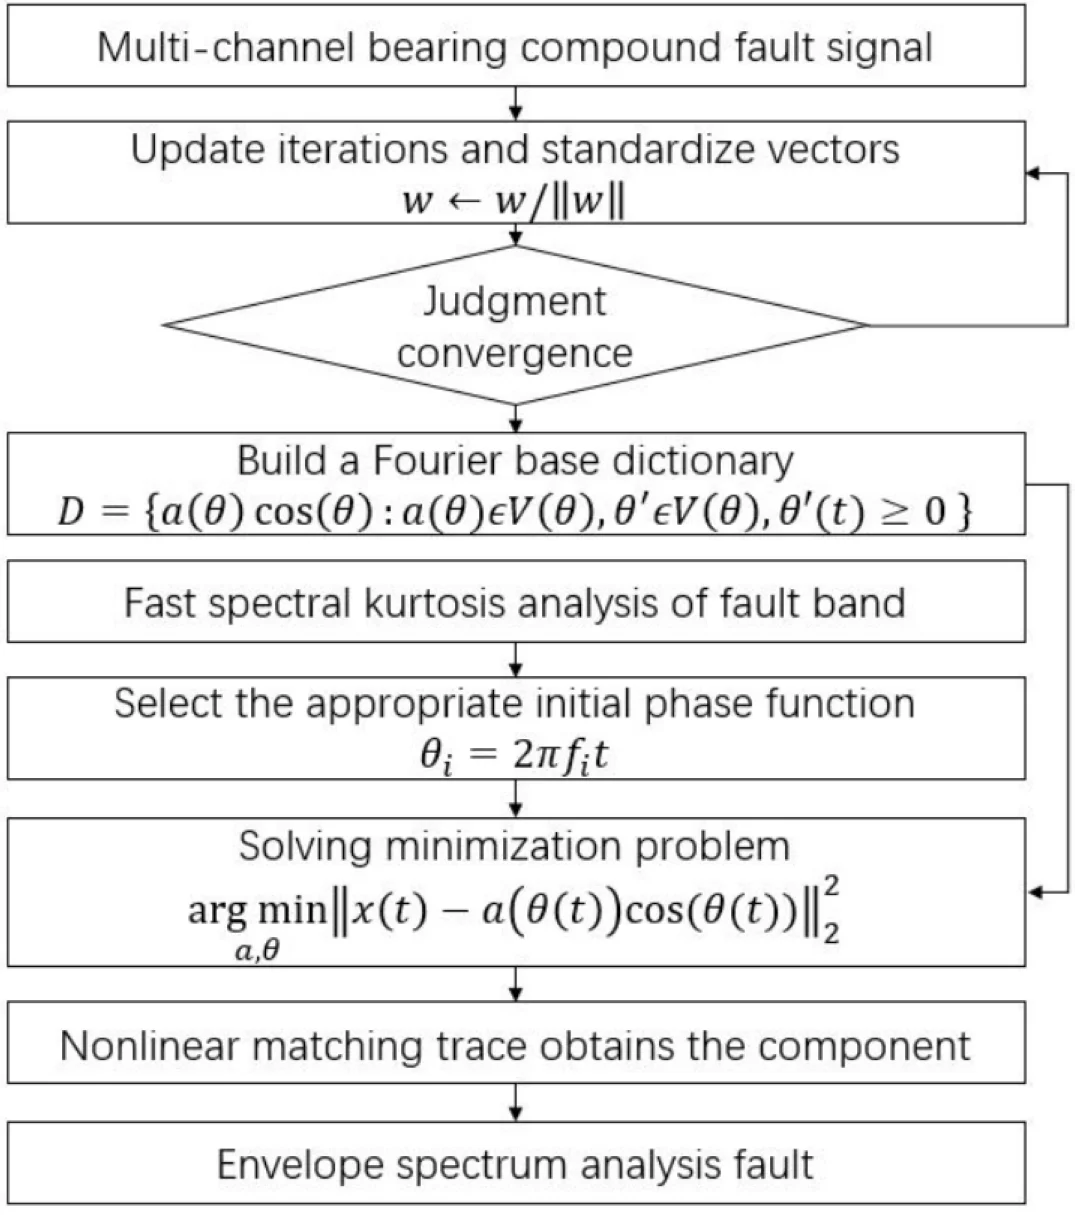 Rolling bearing compound fault diagnosis based on spatiotemporal intrinsic mode decomposition